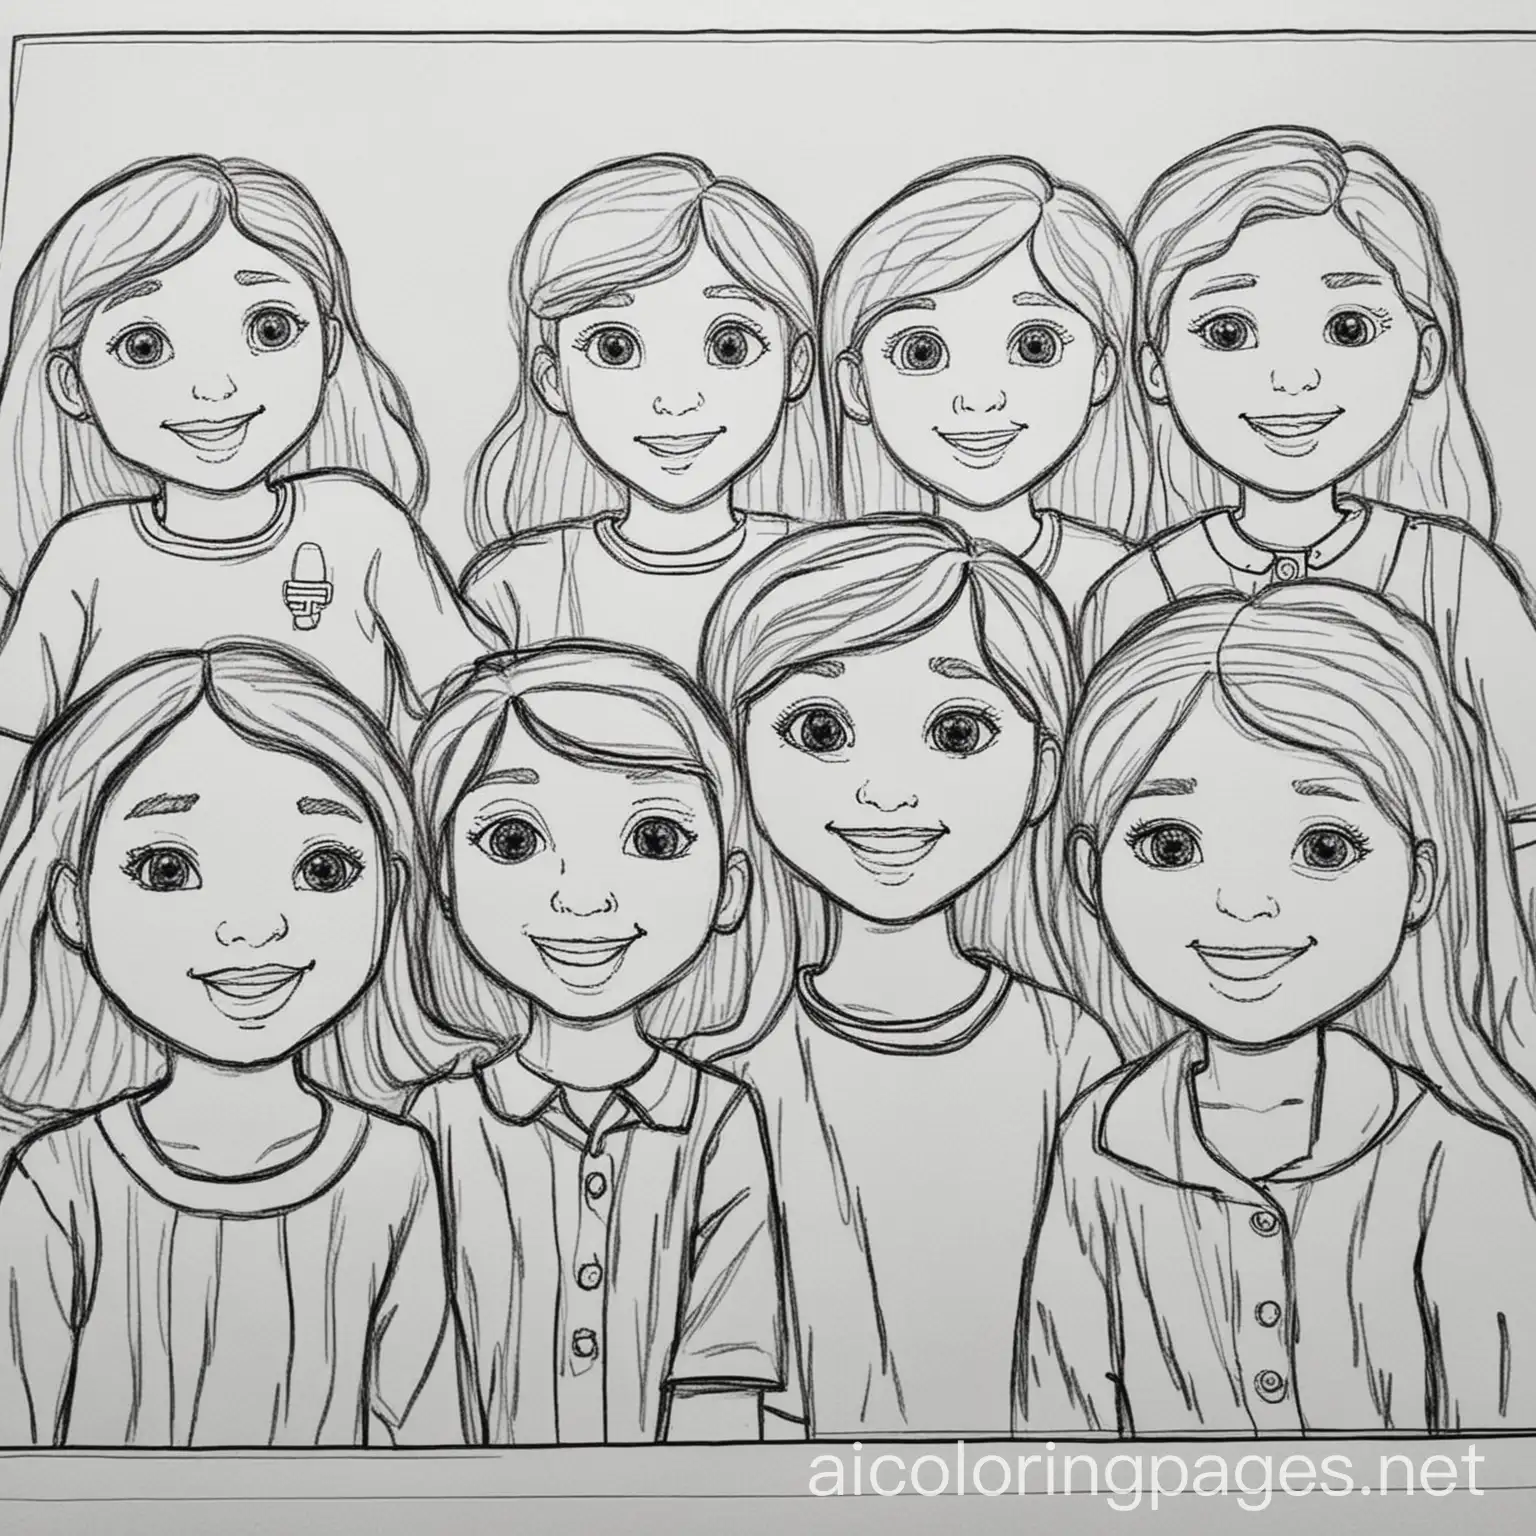 A group of 5th graders 
, Coloring Page, black and white, line art, white background, Simplicity, Ample White Space. The background of the coloring page is plain white to make it easy for young children to color within the lines. The outlines of all the subjects are easy to distinguish, making it simple for kids to color without too much difficulty